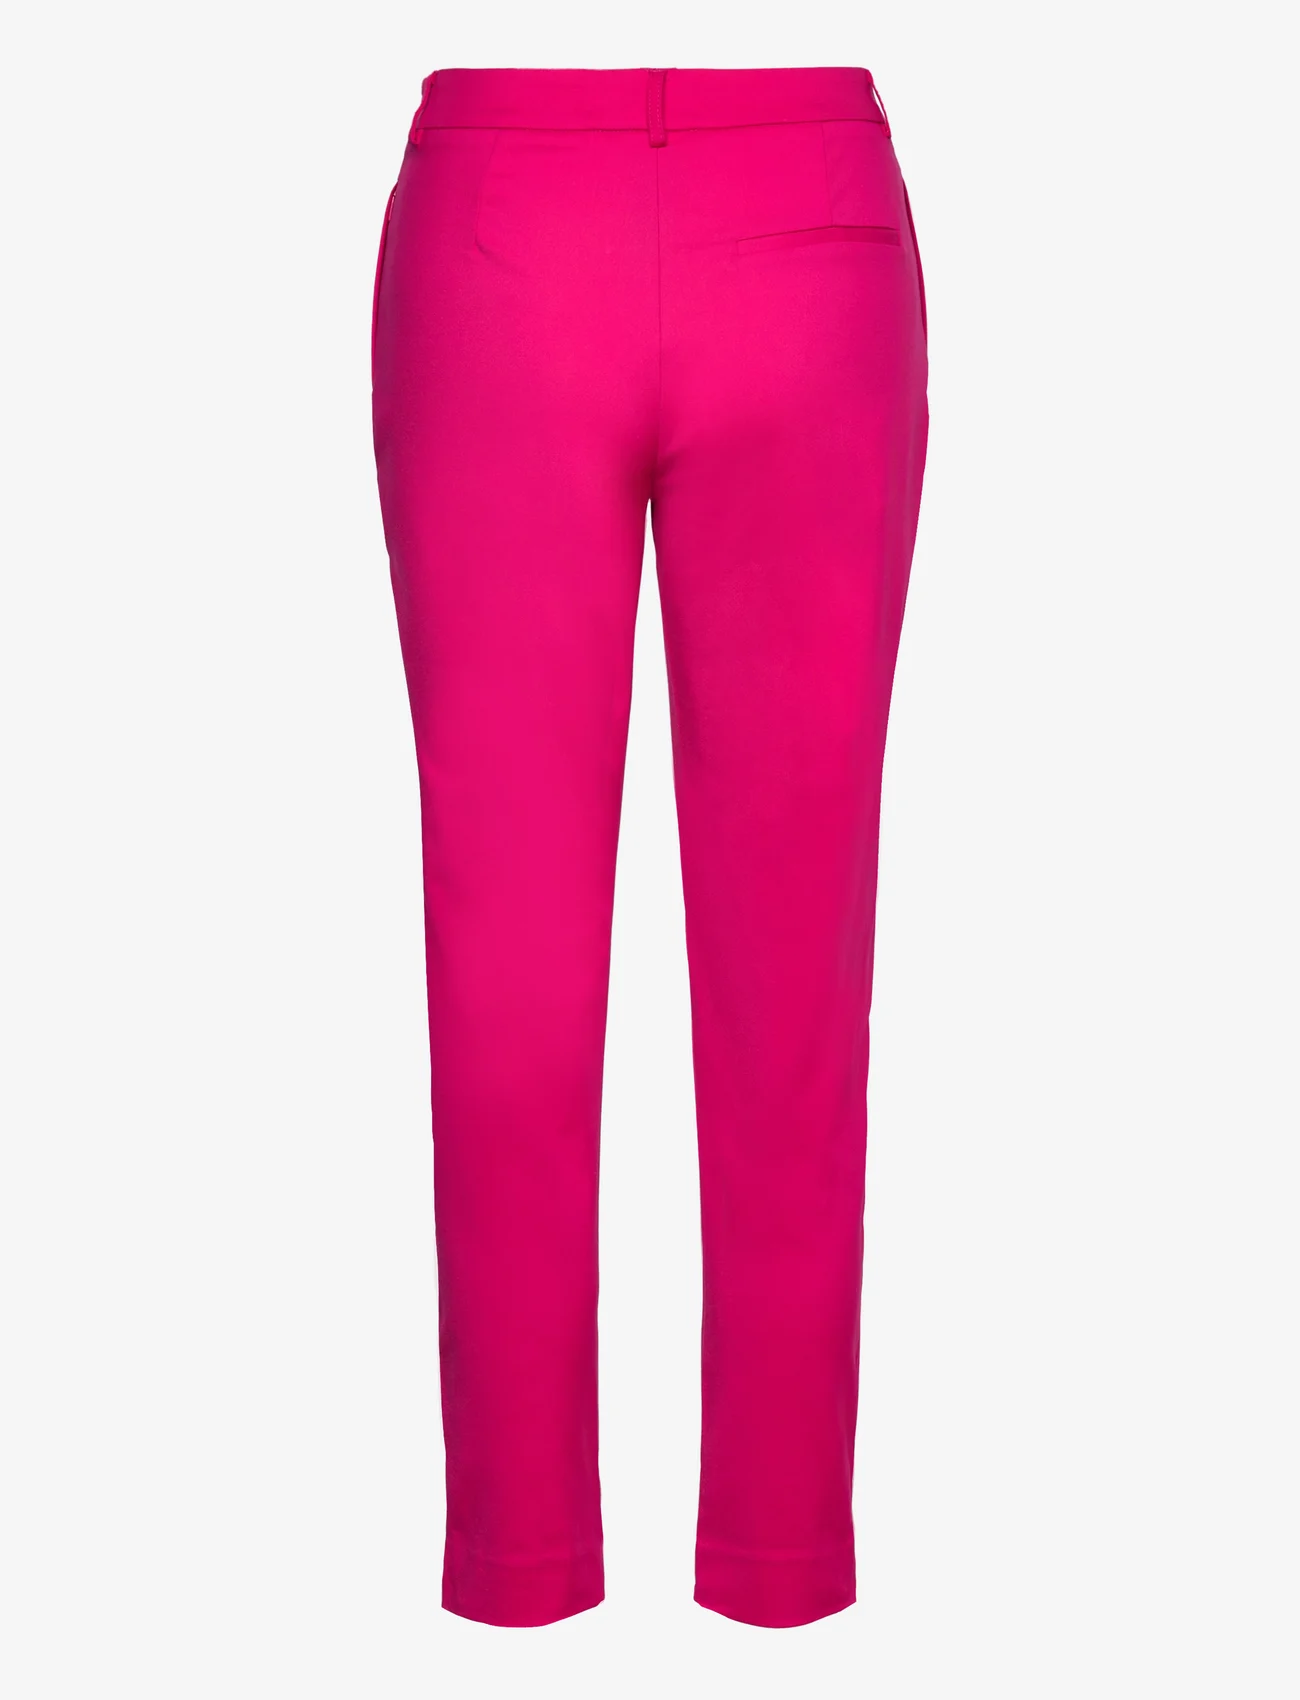 Coster Copenhagen - Tapered pants - Stella fit - slim fit trousers - raspberry pink - 1